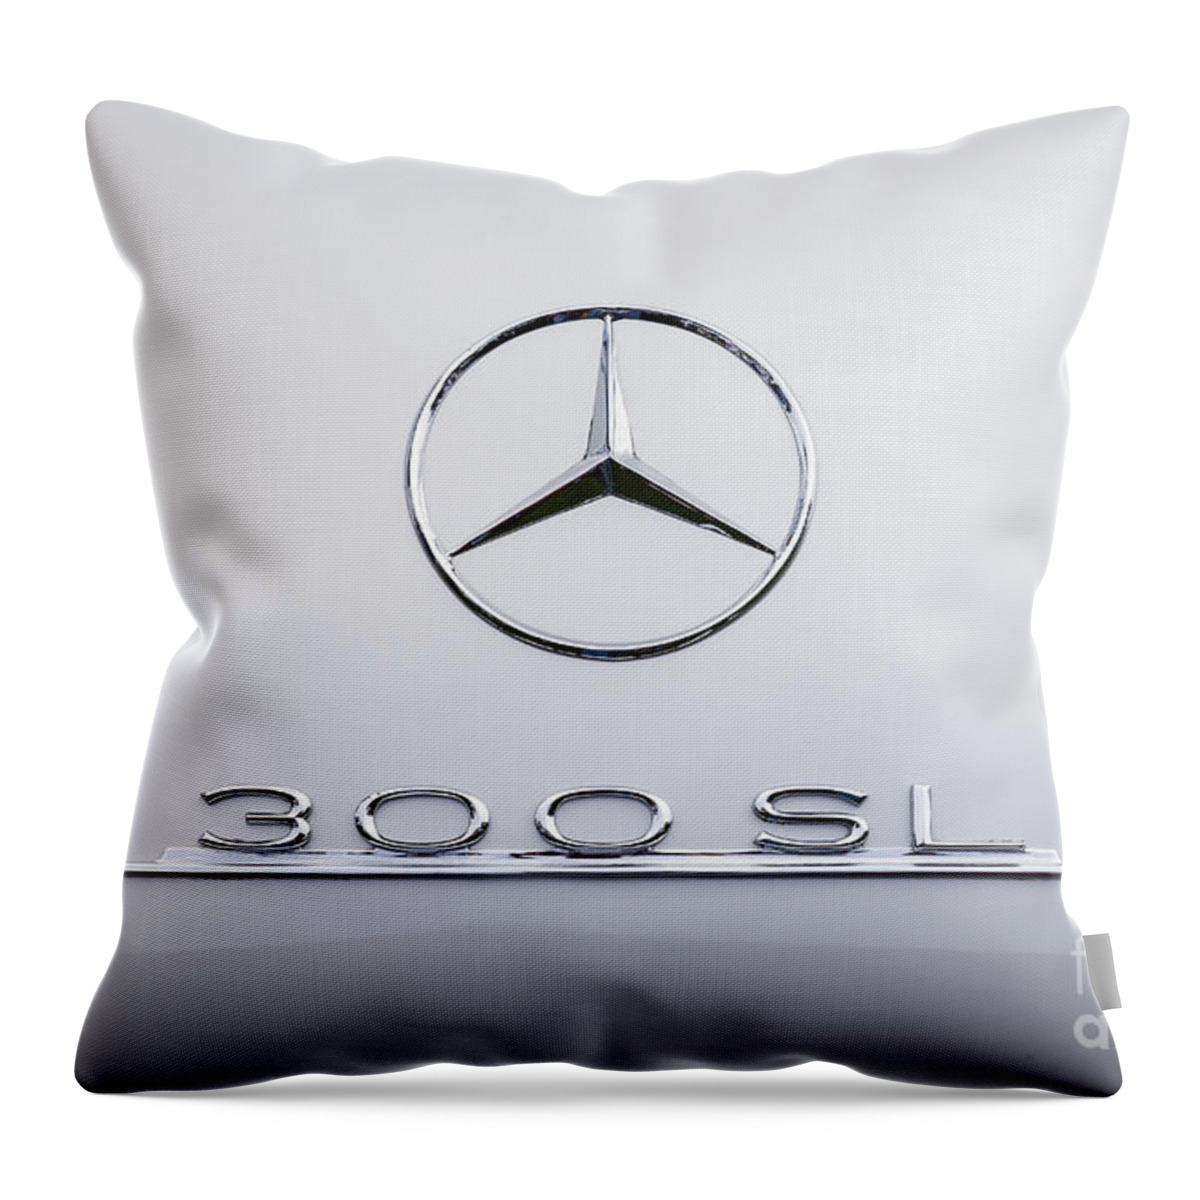 Mercedes Benz Throw Pillow featuring the photograph 300 Sl by Dennis Hedberg